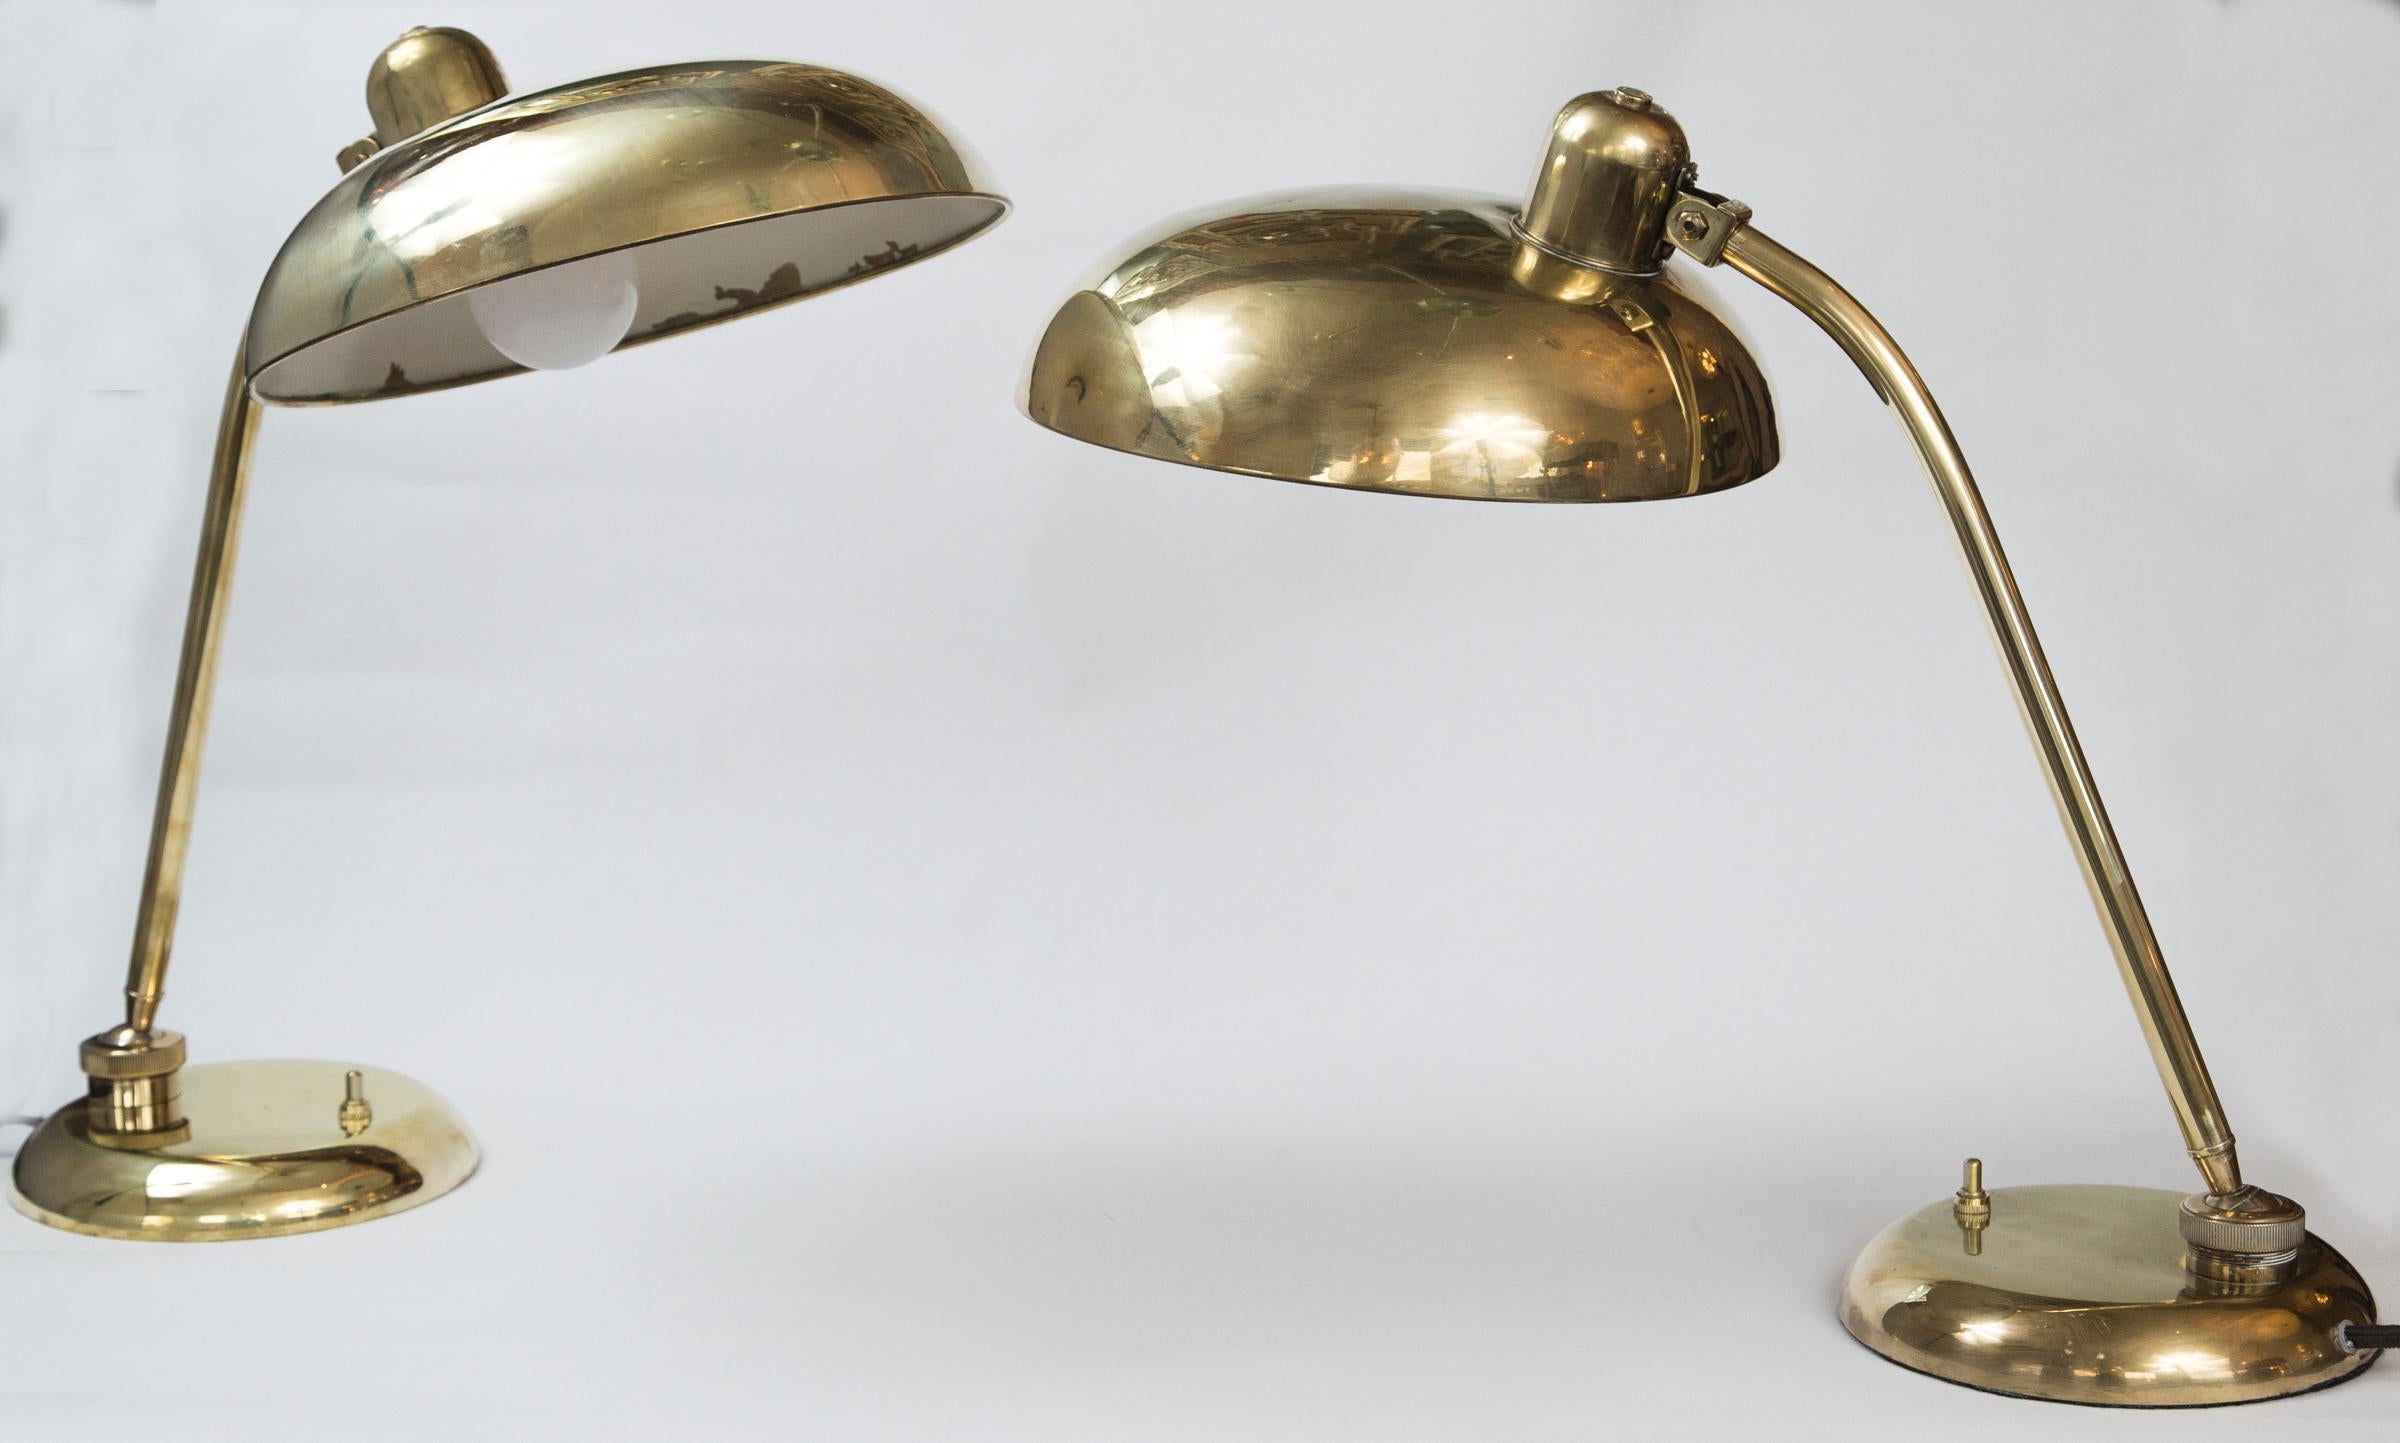 Handsome pair of Italian vintage unlacquered brass lamps with rotating arm and shade attributed to Arredoluce
Origin: Italy
Period: circa 1940-1950
Dimensions: 11? diameter, 18? high
Condition: Excellent, prior to acquiring in original